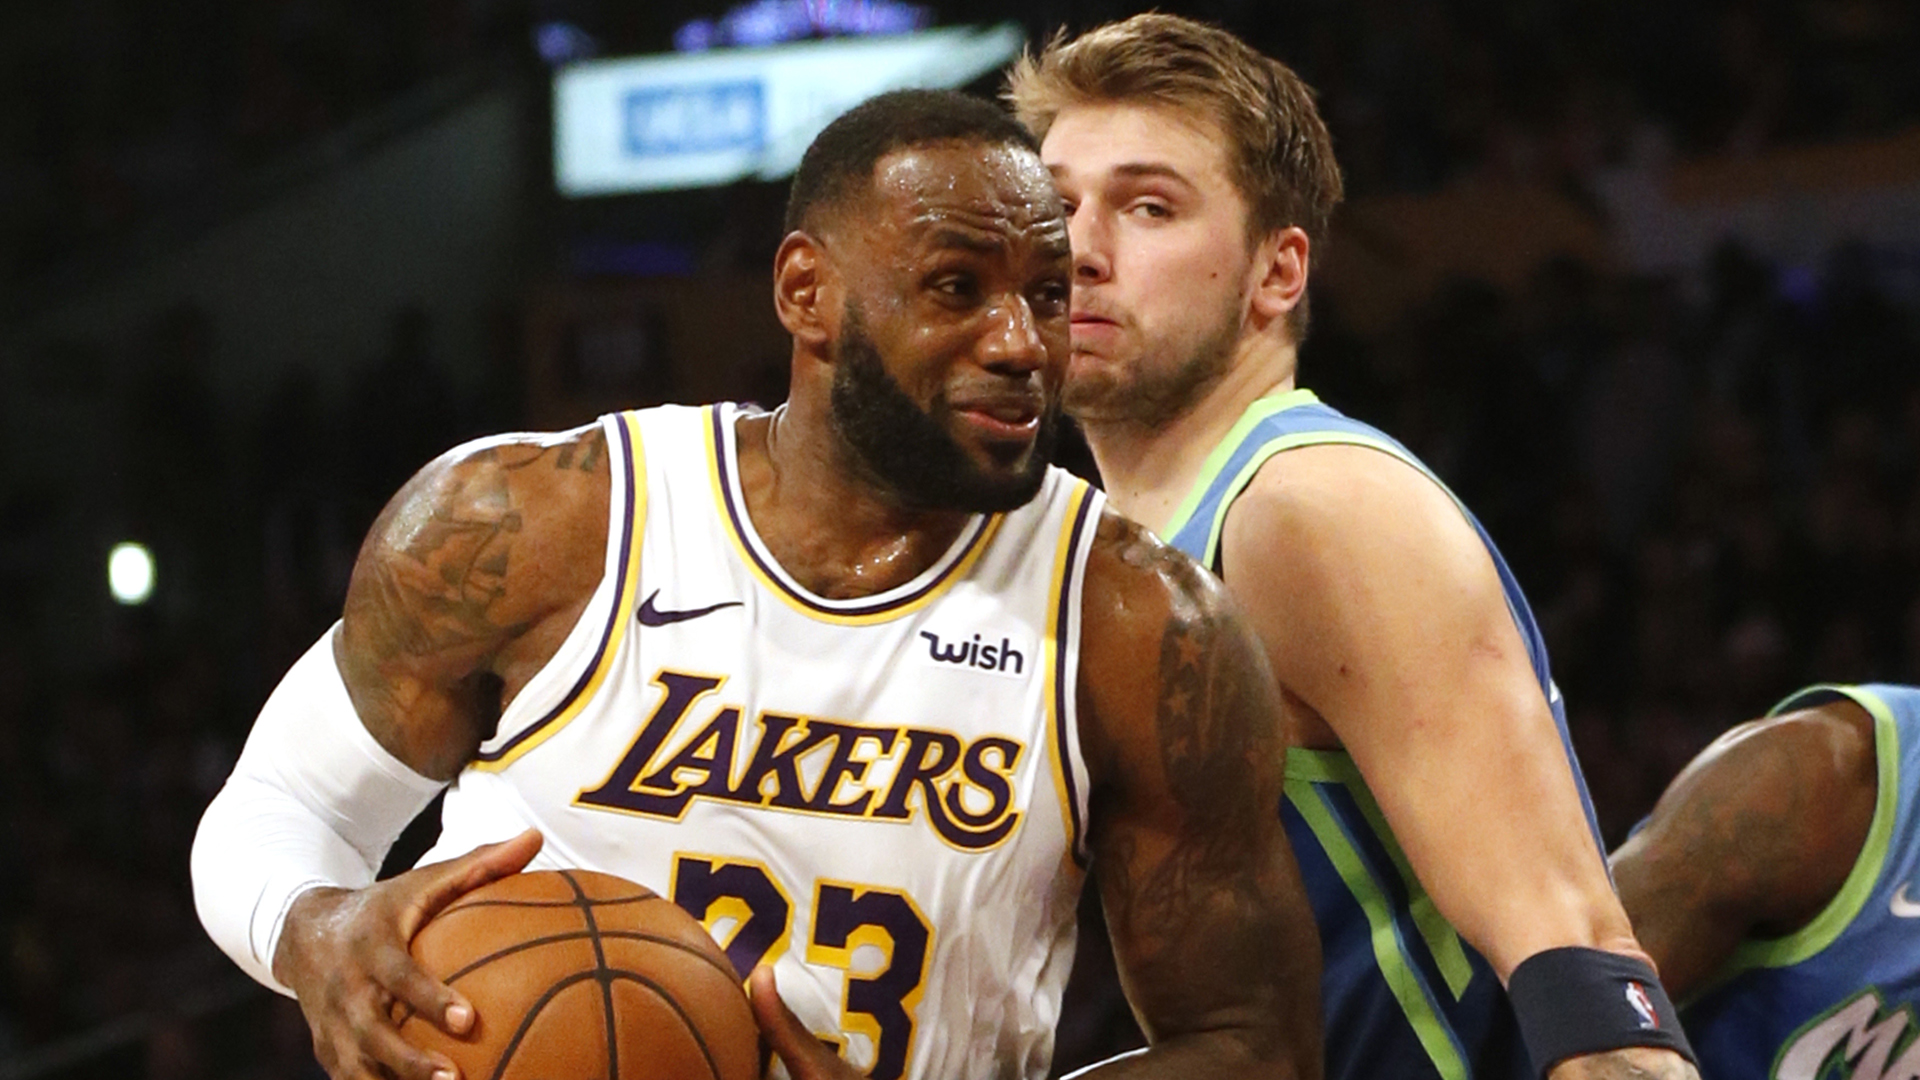 Luka Doncic and the Dallas Mavericks ended the Los Angeles Lakers' winning streak at 10.